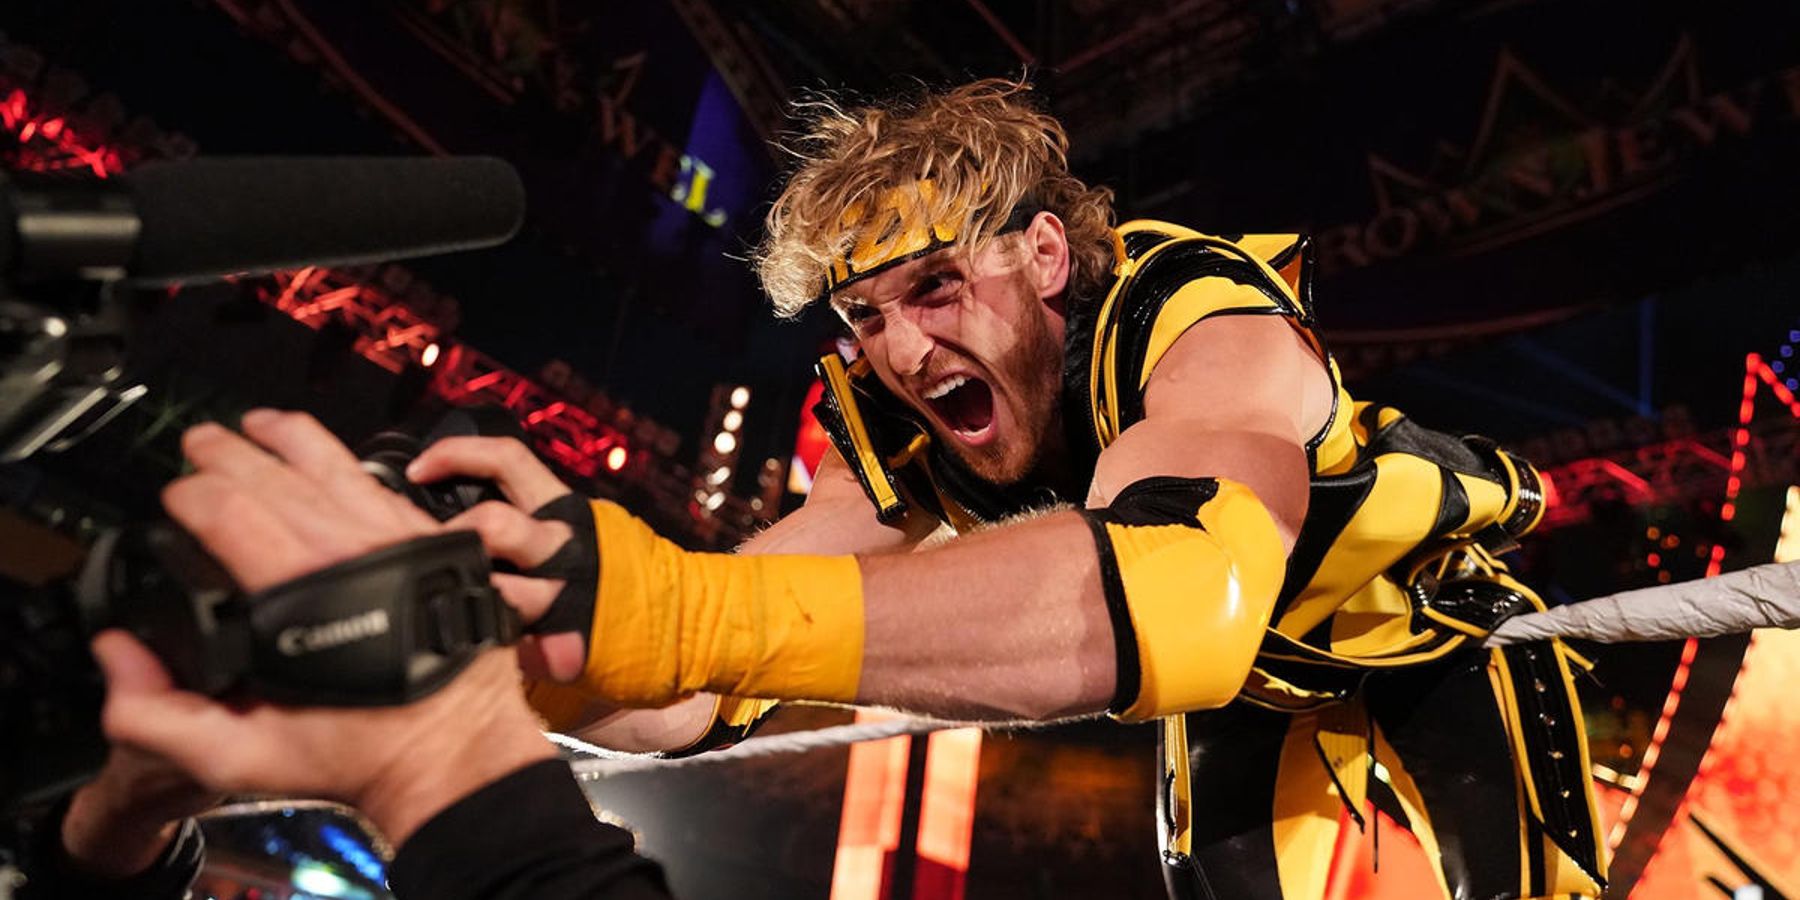 Logan Paul makes his electric entrance during Crown Jewel before taking on Roman Reigns for the unified WWE Championship.